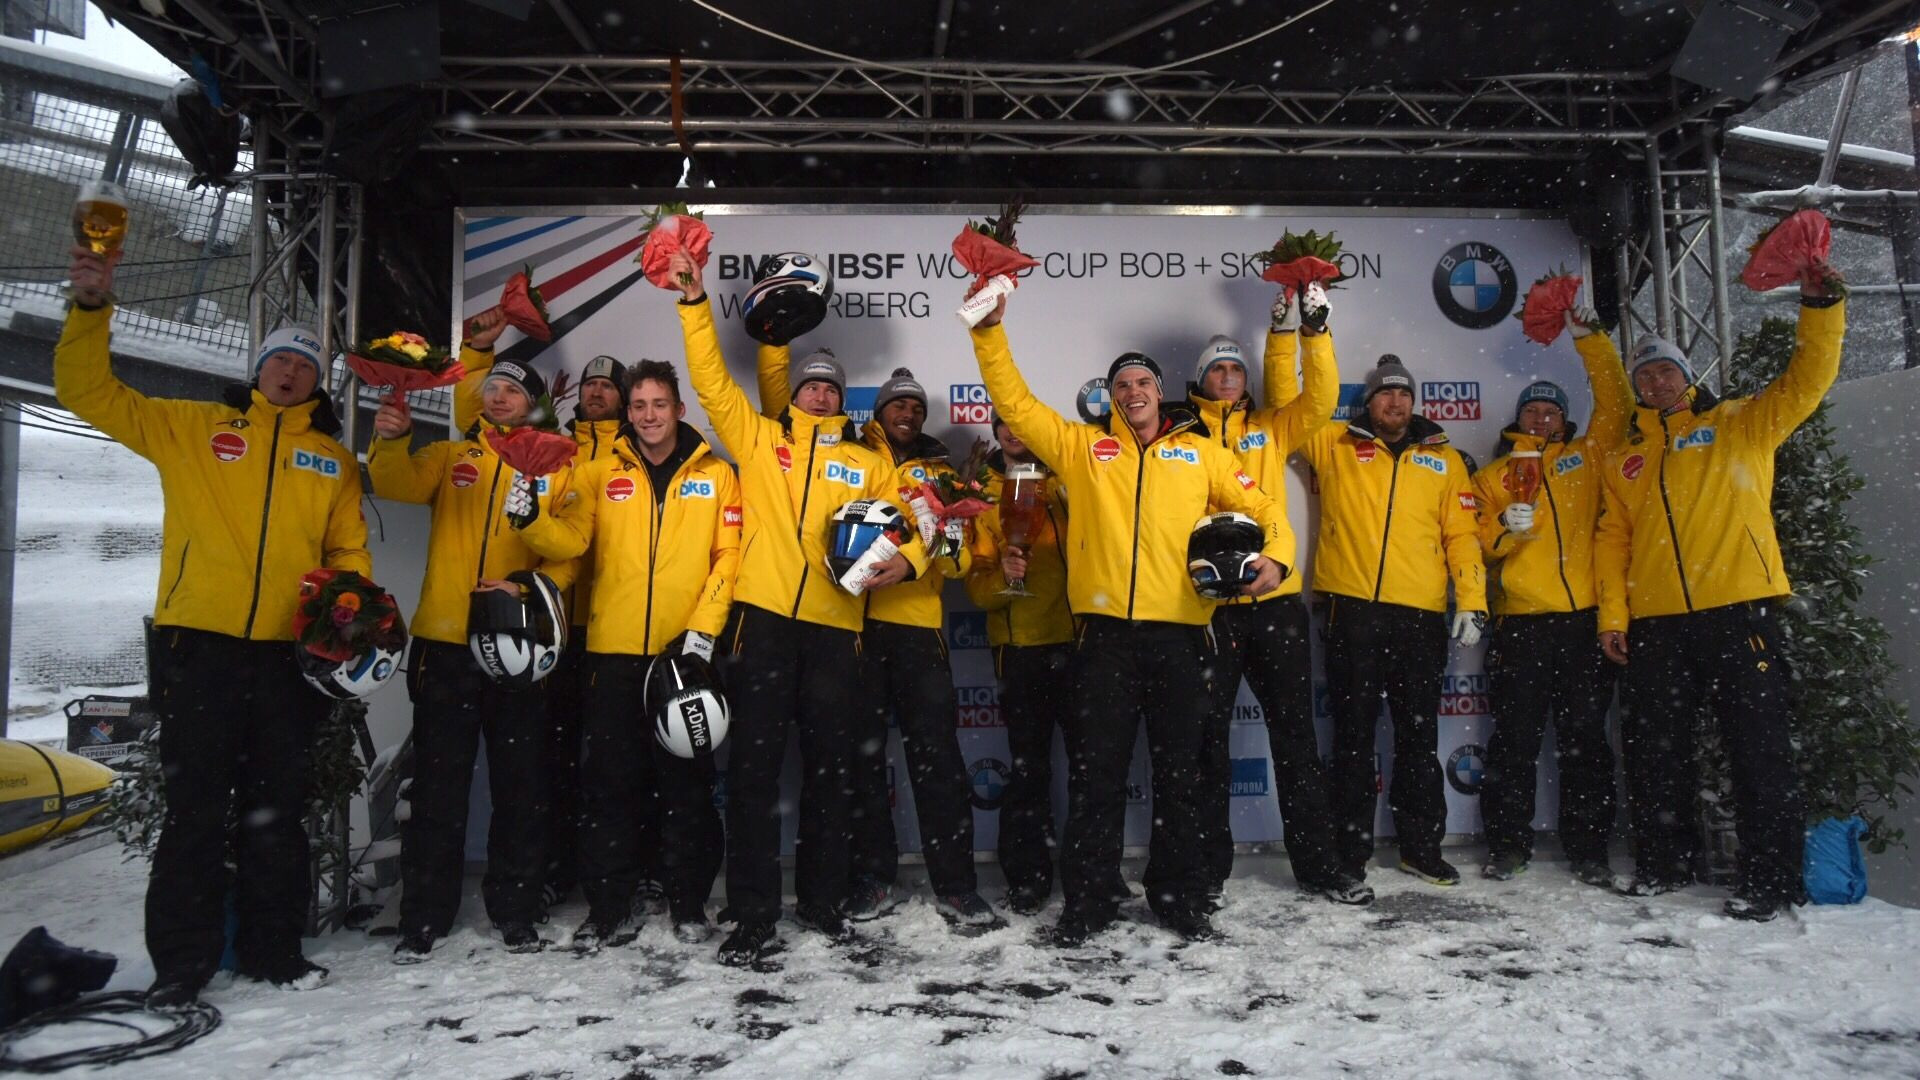 Three German teams dominated the four man event at Winterberg ©IBSF